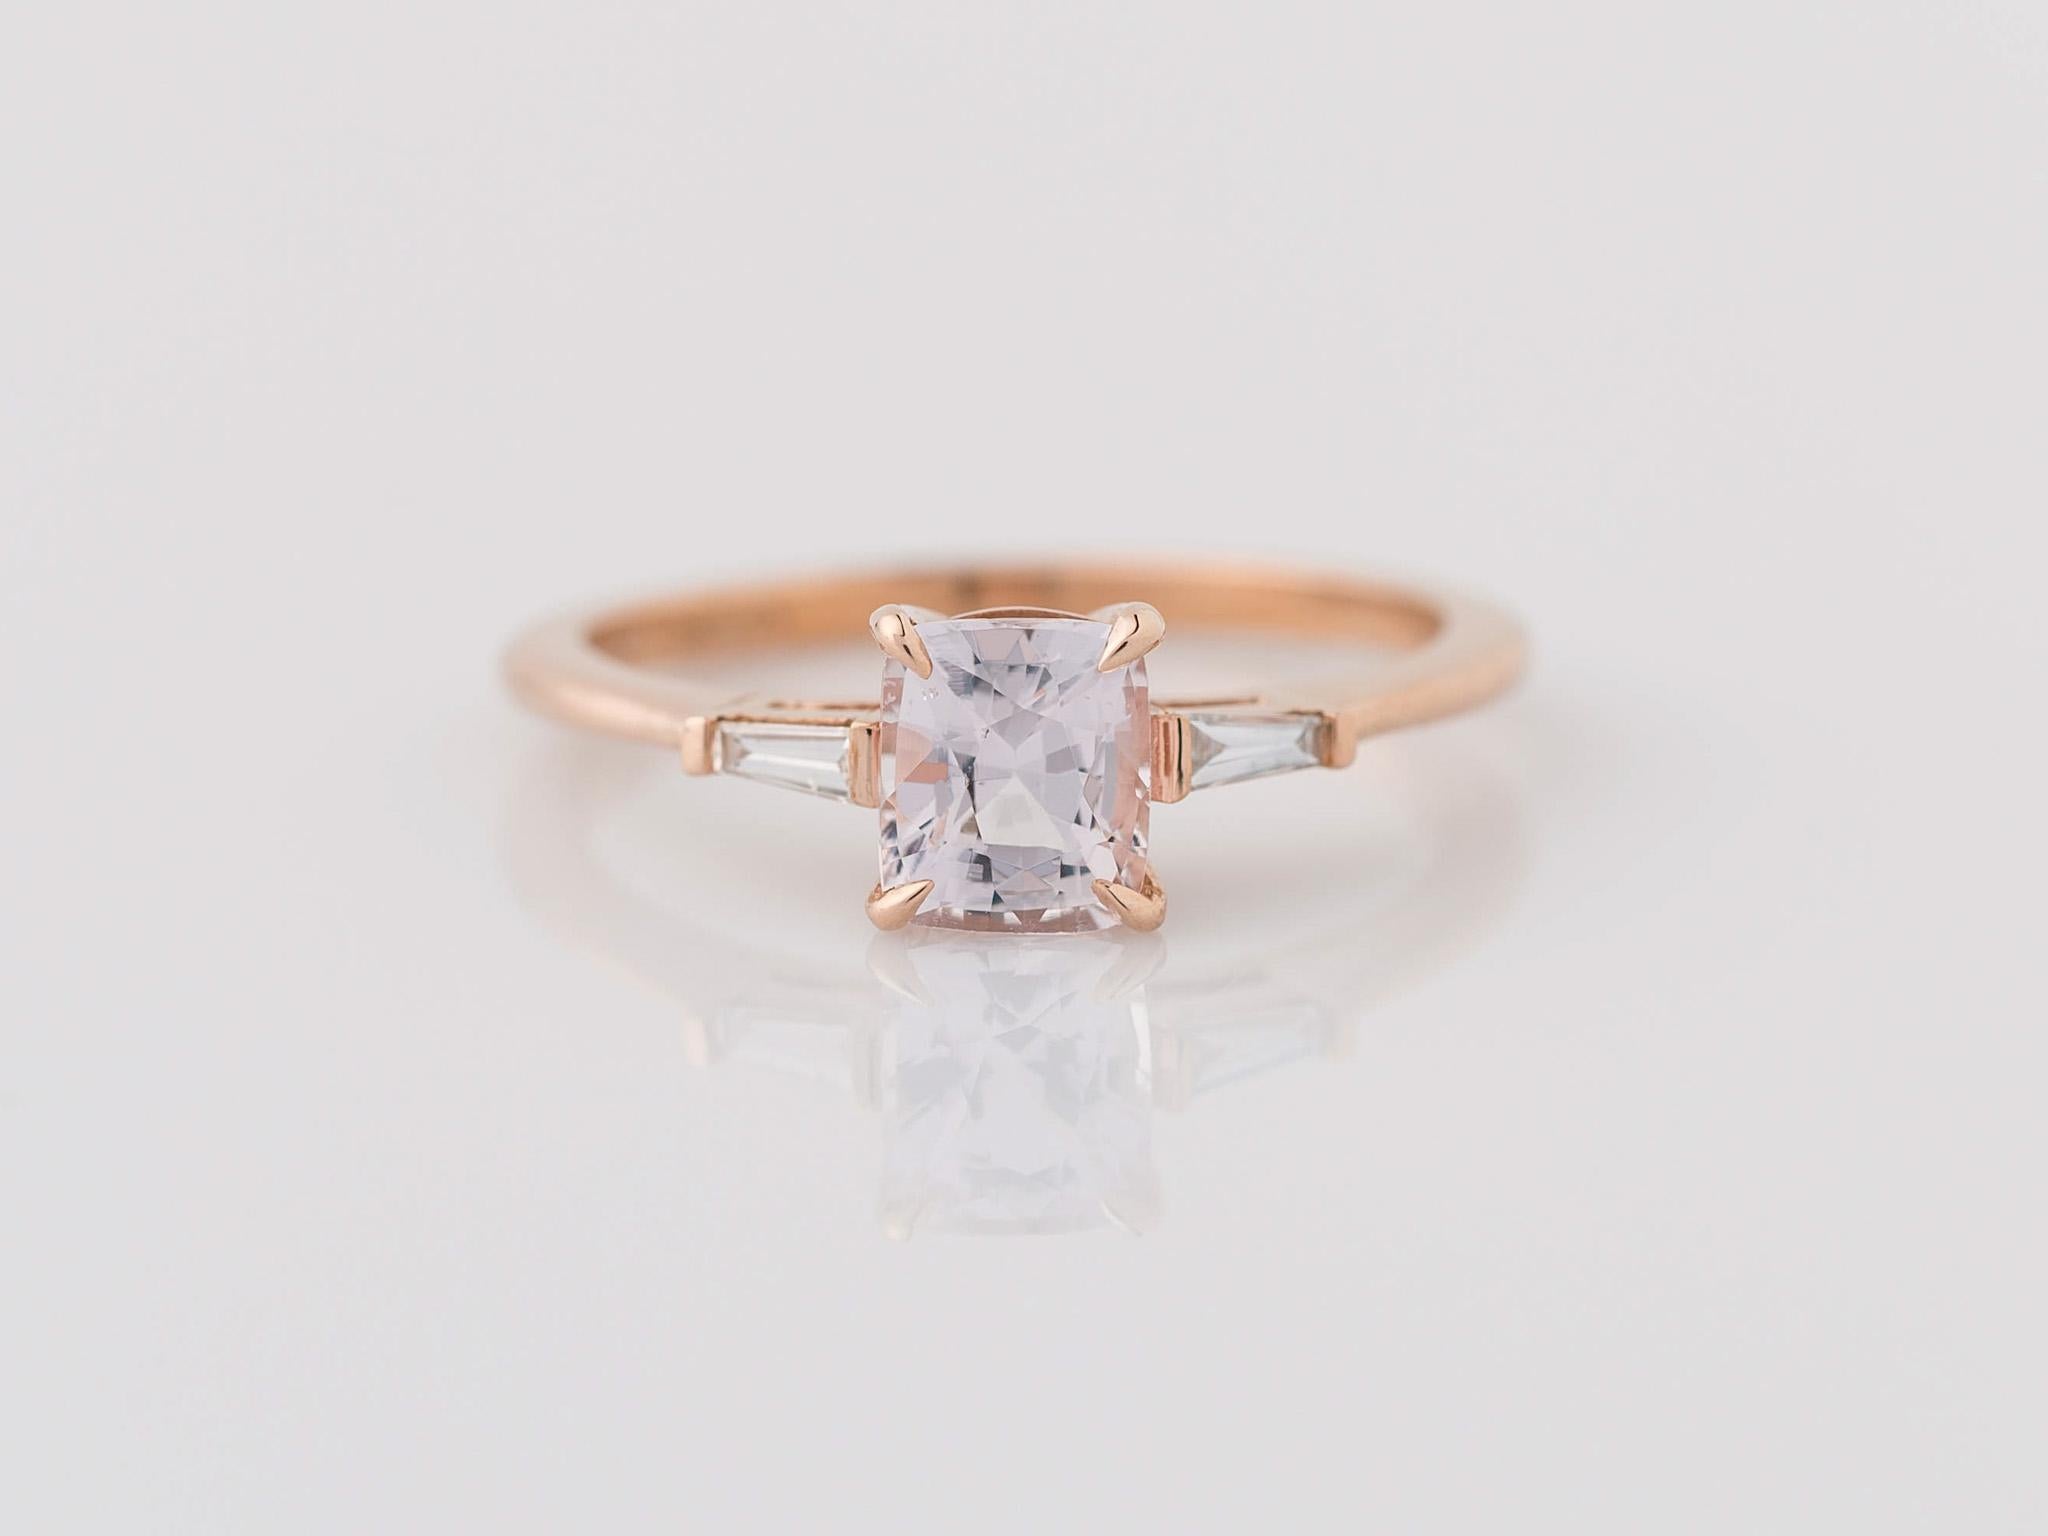 Step into a world of timeless elegance with our breathtaking GIA-certified natural 1.01 carat Light Pink Peach Sapphire 3-Stone Ring. The enchanting center stone, measuring 5.88x5.05x3.77mm, radiates natural allure with its unheated, transparent